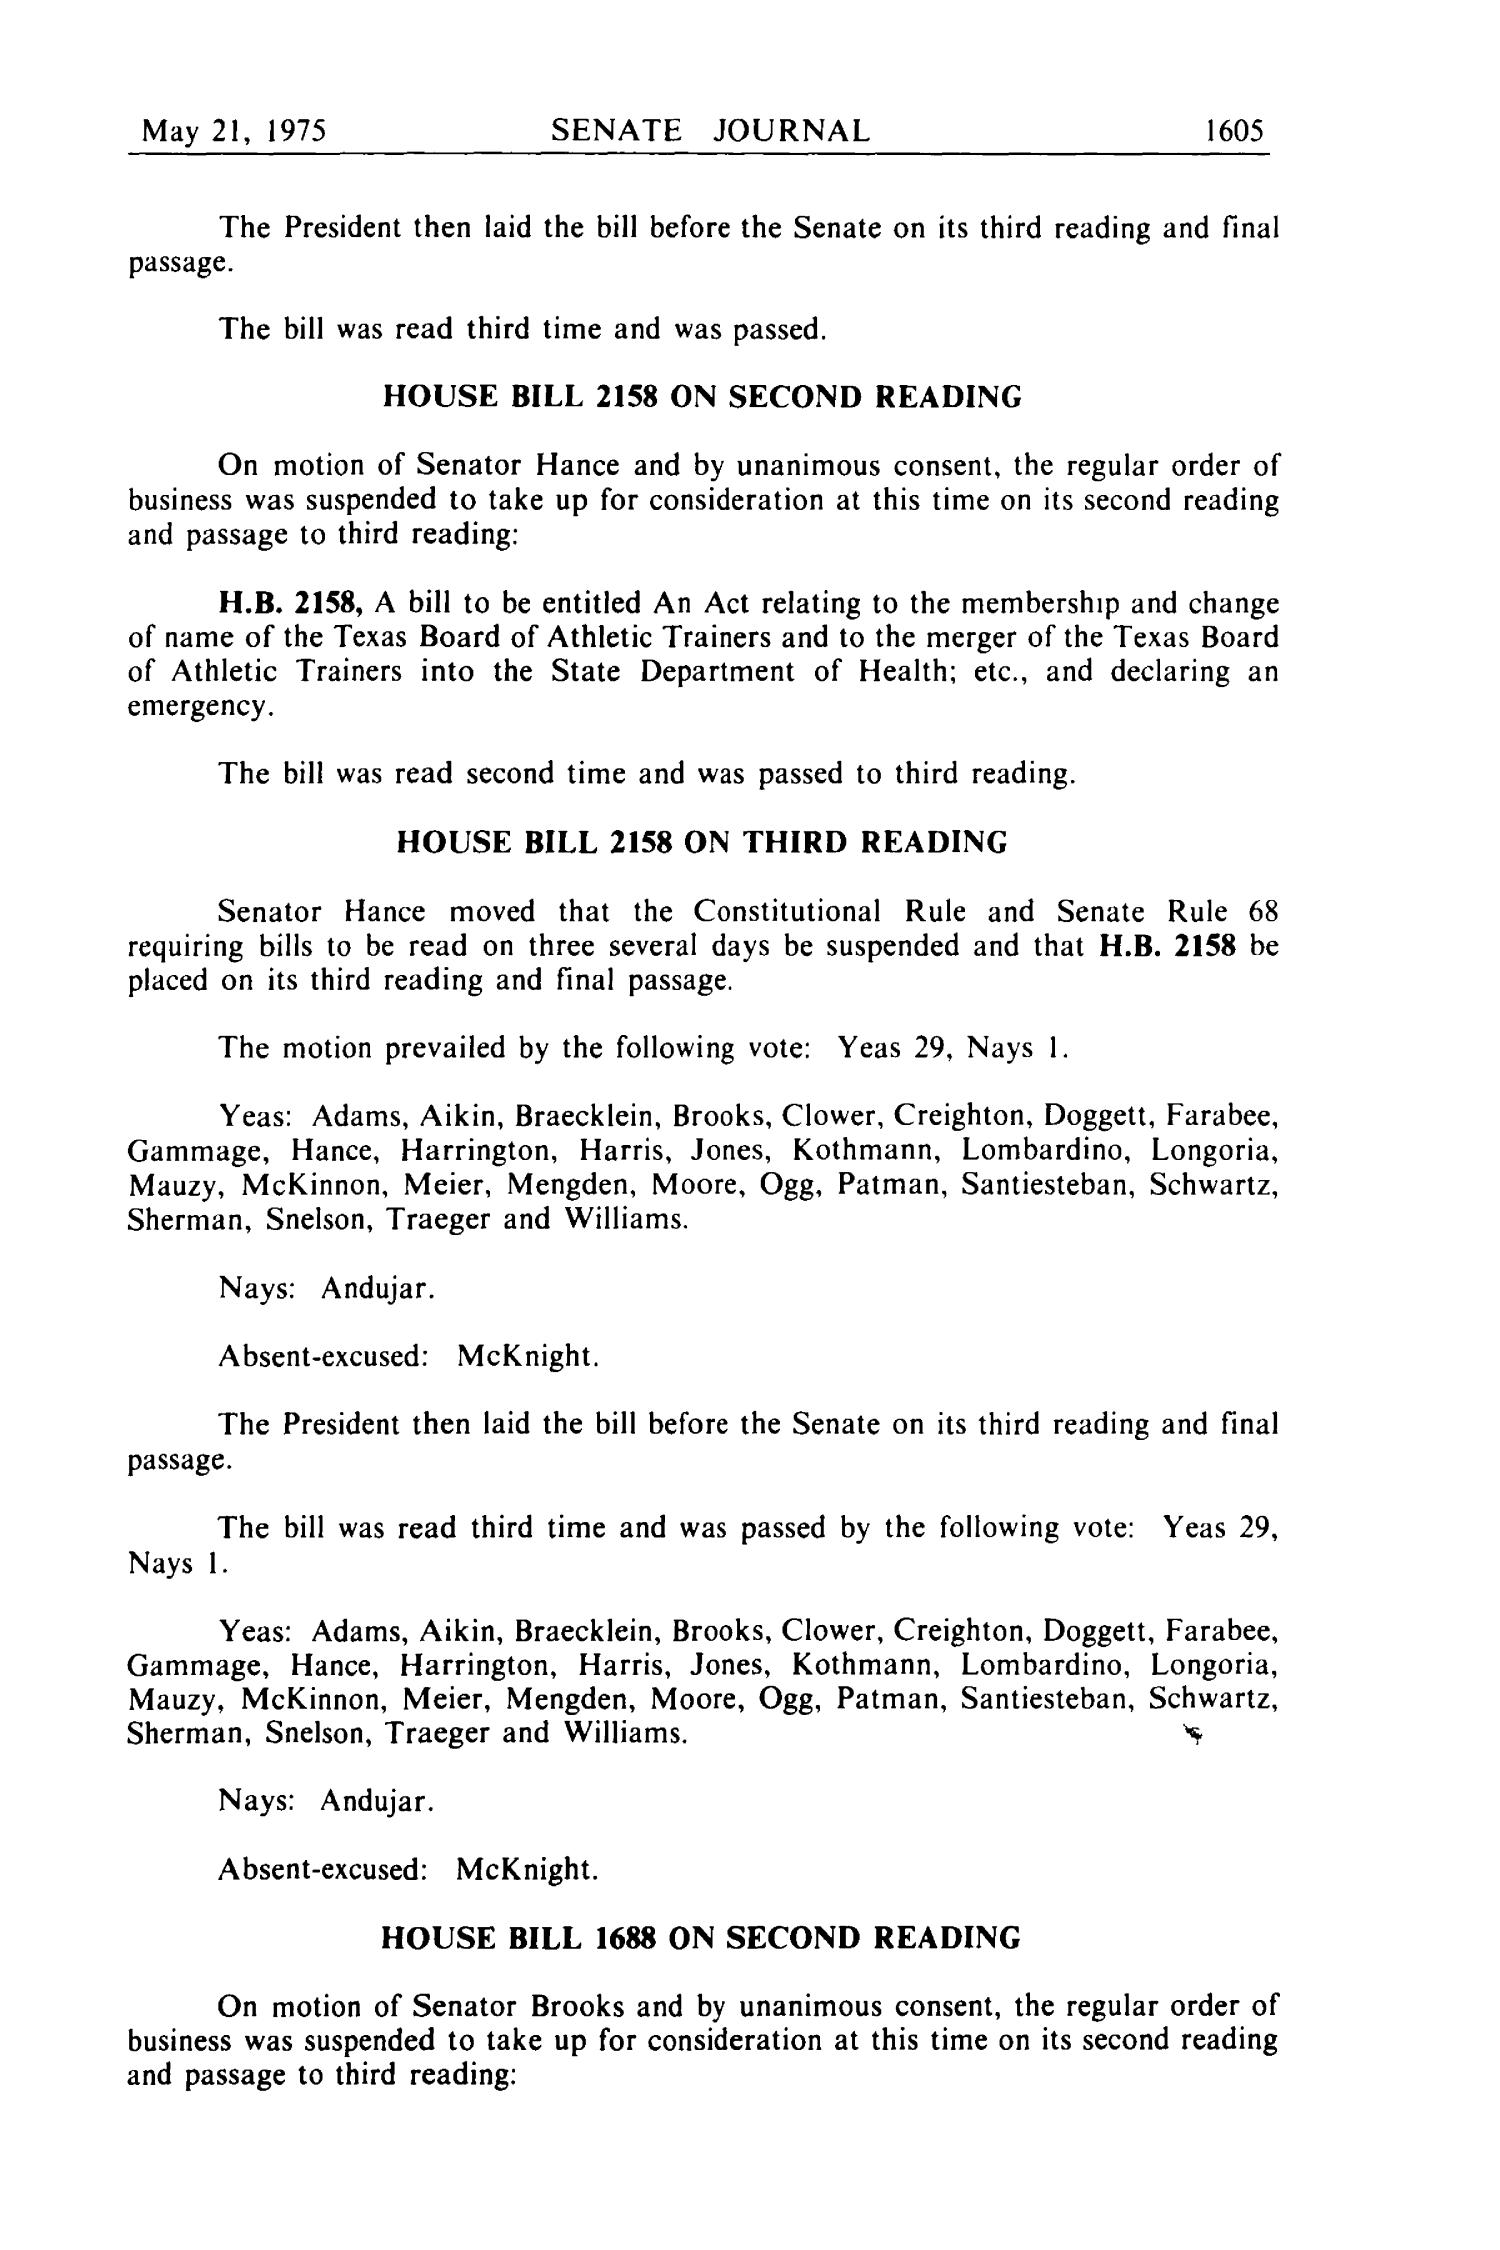 Journal of the Senate of the State of Texas, Regular Session of the Sixty-Fourth Legislature, Volume 2
                                                
                                                    1605
                                                